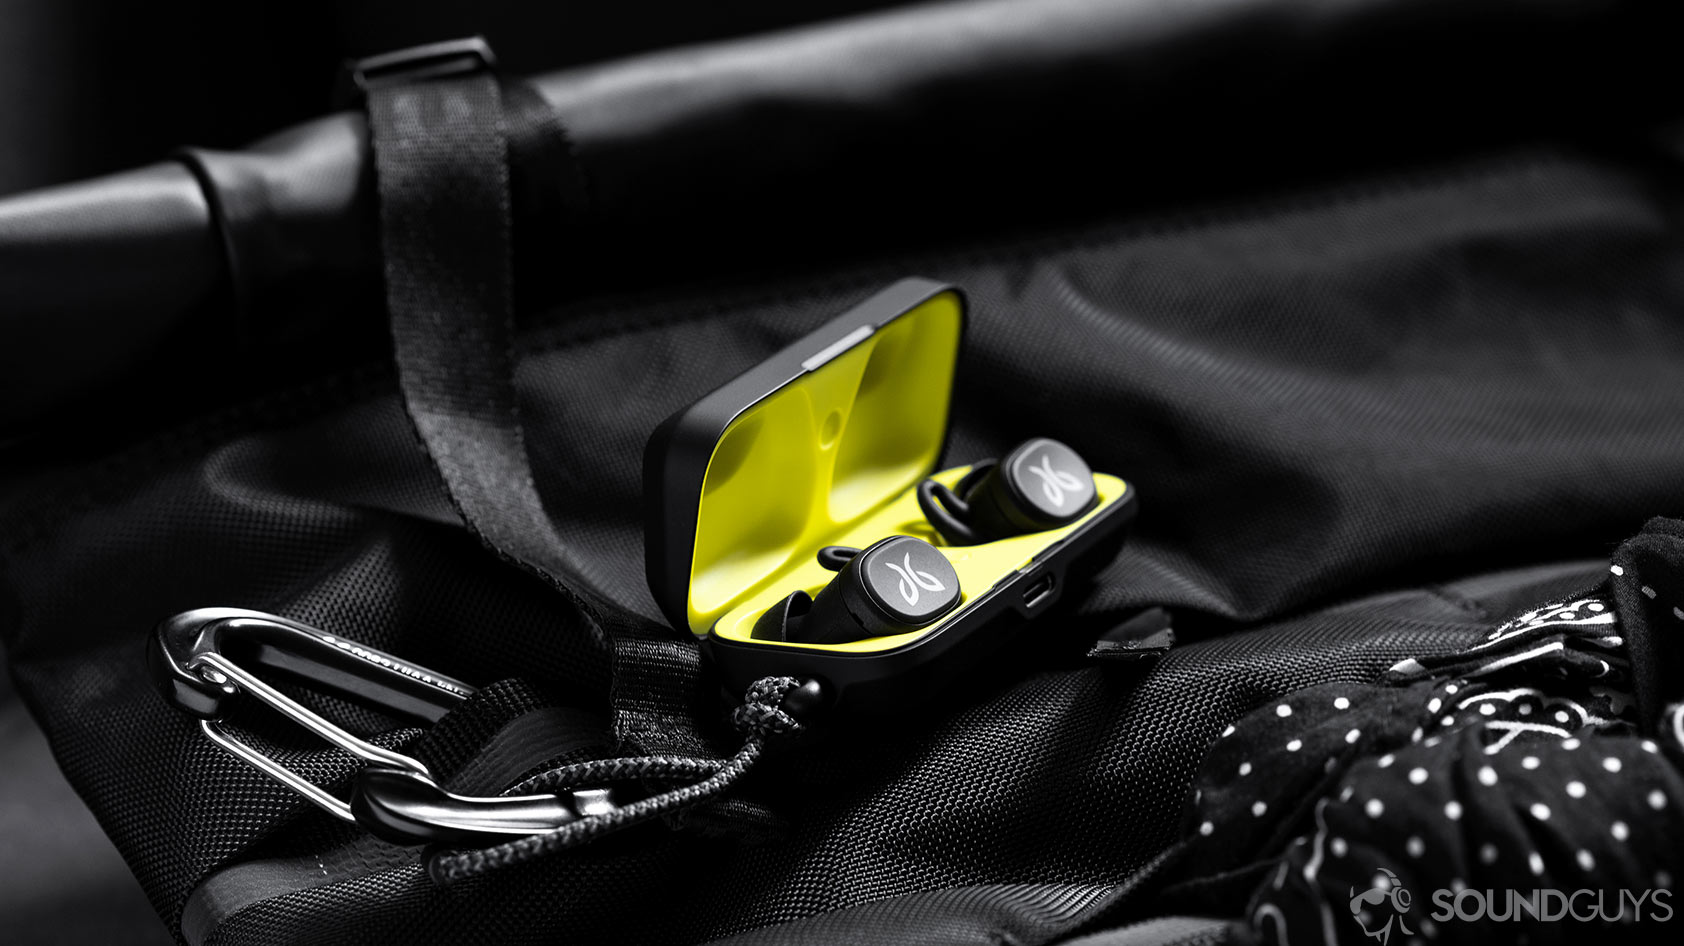 An image of the Jaybird Vista earbuds in charging case which is open and on a Chrome backpack.